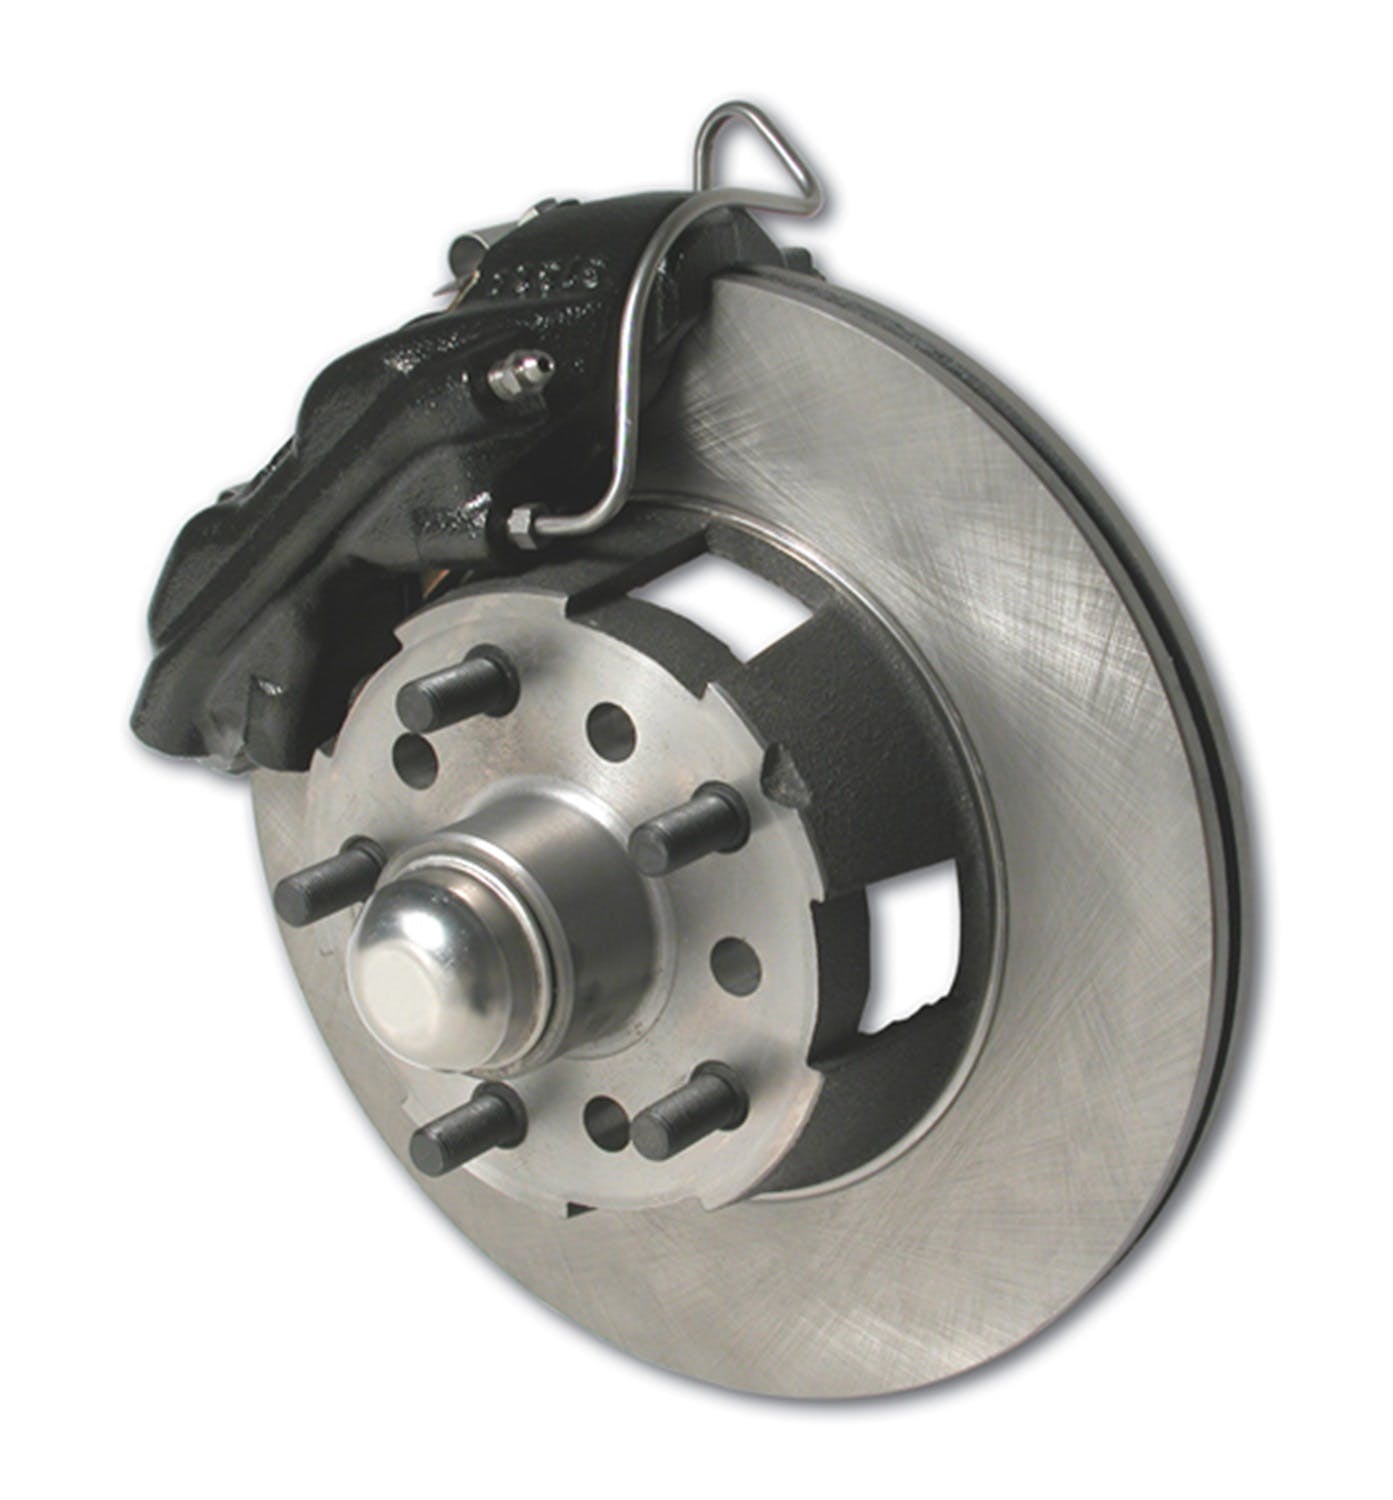 Stainless Steel Brakes W154 At The Wheels Front drm/dsc conv Mopar C-Body